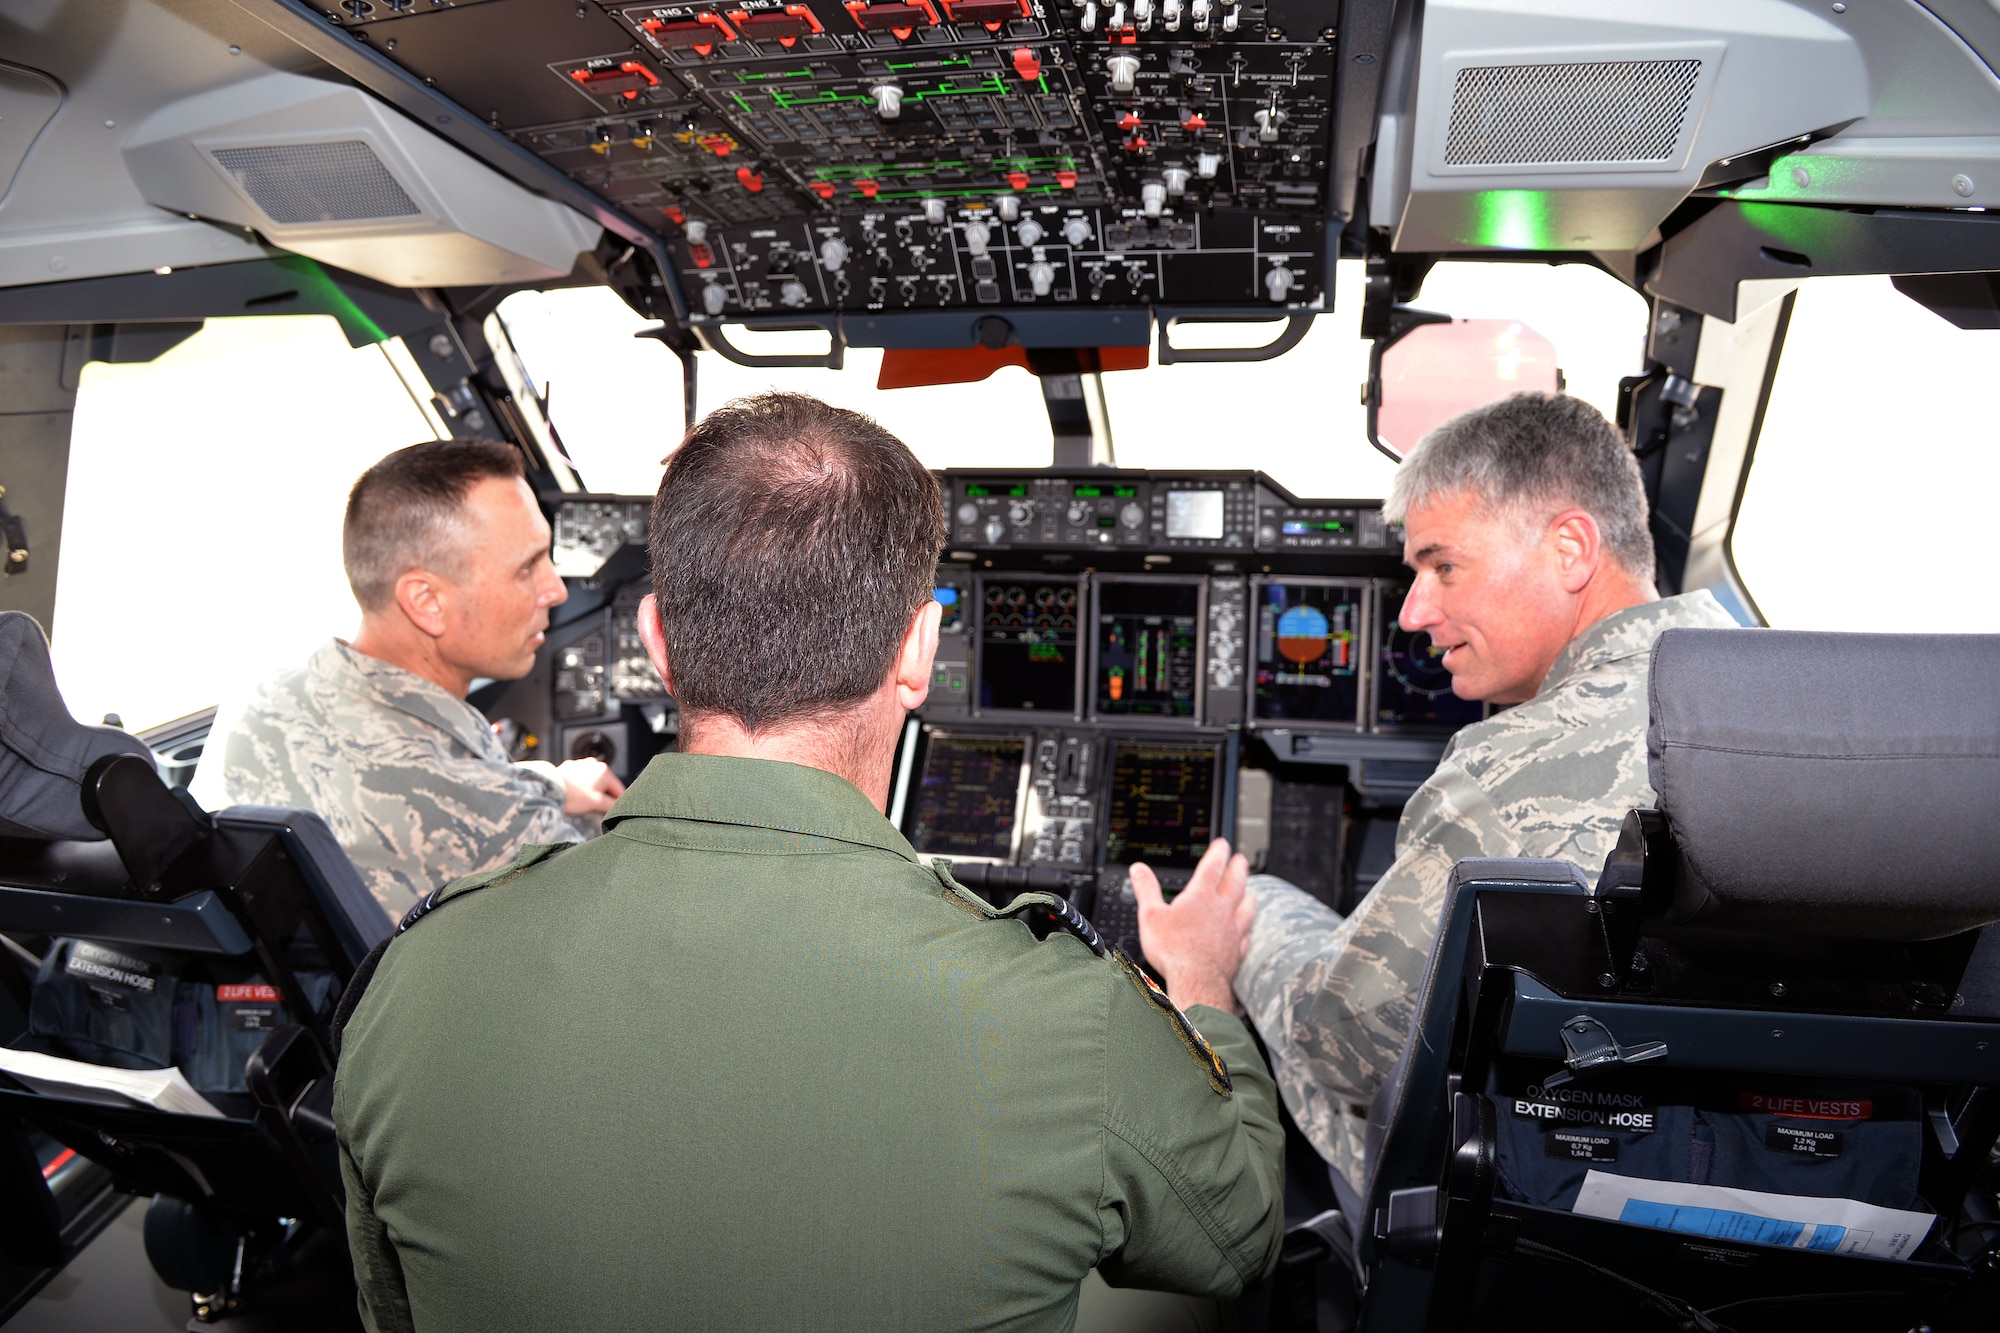 Lt. Gen. Sam Cox (right), 18th Air Force commander, and Chief Master
Sgt. Todd Petzel (left), 18th AF command chief, are shown the cockpit
features of a British Royal Air Force A-400M Atlas airlifter on the Scott
Air Force Base flightline, April 5, 2016. The aircraft tour was part of a
visit by British Air Vice Marshal Gavin Parker, 2 Group commander and Cox's
RAF equivalent. During his trip, Park also visited Air Mobility Command, the
618th Air Operations Center and the U.S. Transportation Command Fusion
Center. The A-400M is the RAF's newest airlifter with six in the RAF
inventory and another 19 scheduled for delivery. (U.S. Air Force photo by
Master Sgt. Thomas J. Doscher)
